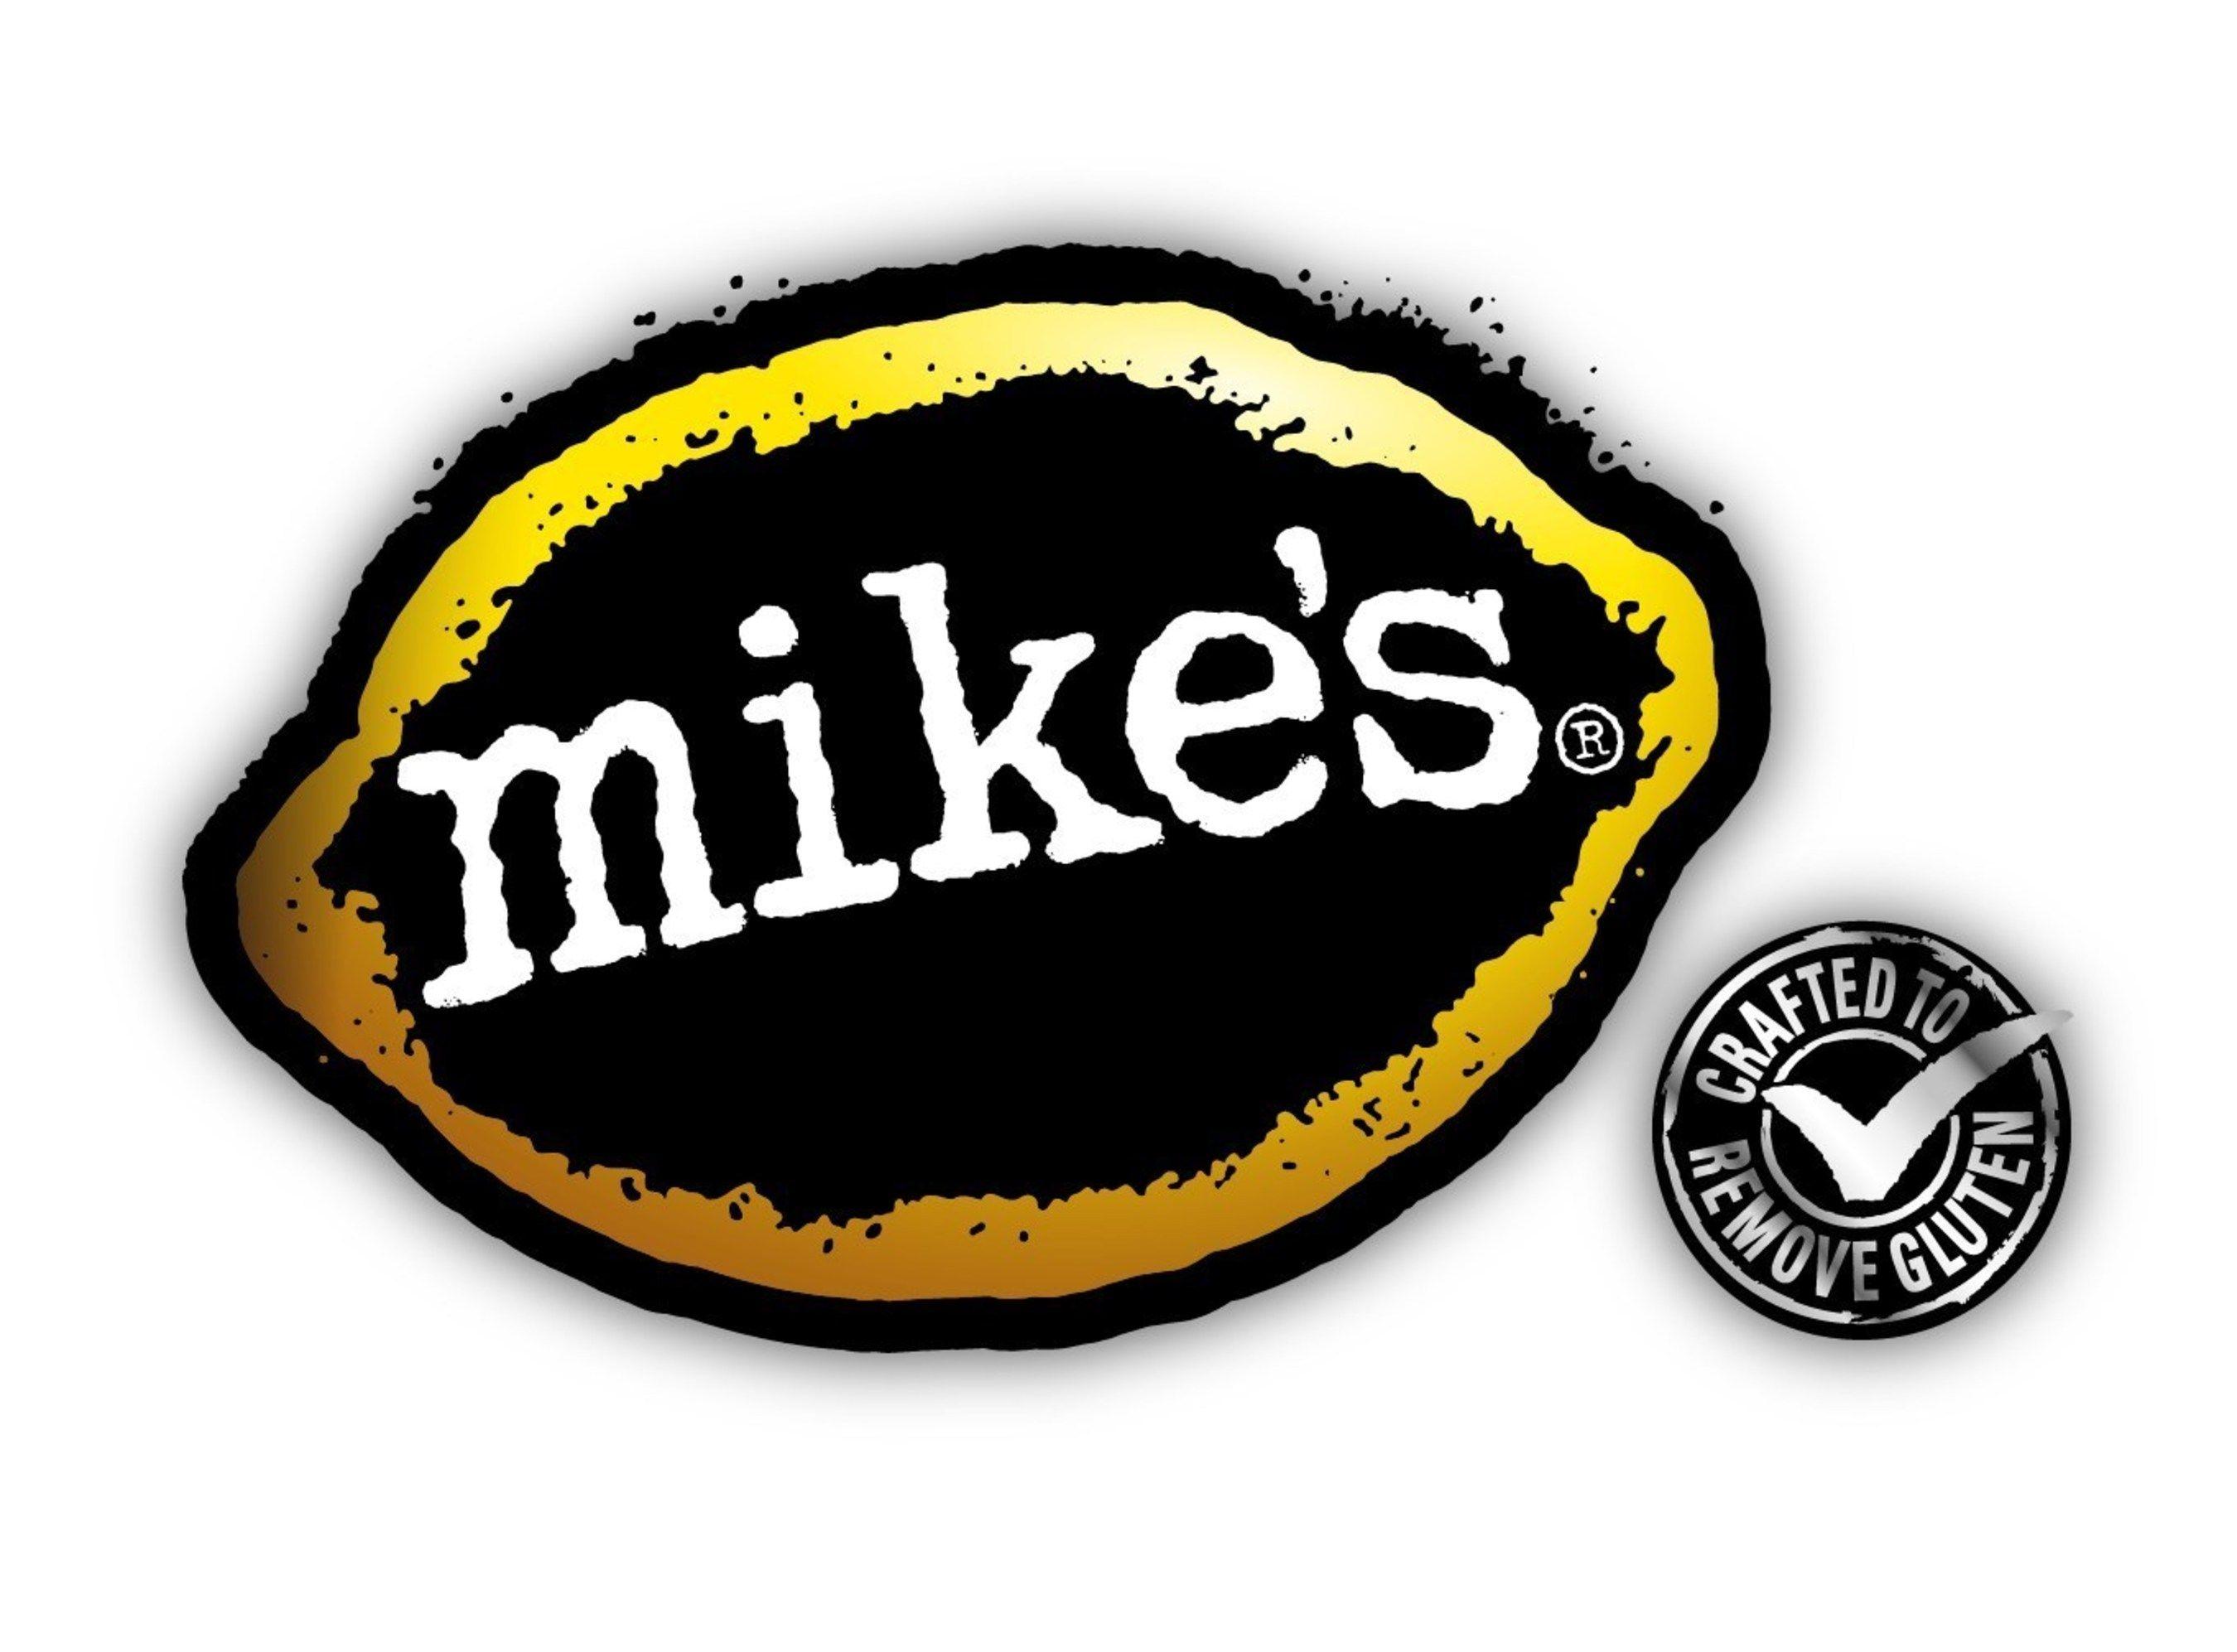 Mike's Logo - Mike's Hard Lemonade Co. Introduces New 'Crafted to Remove Gluten ...